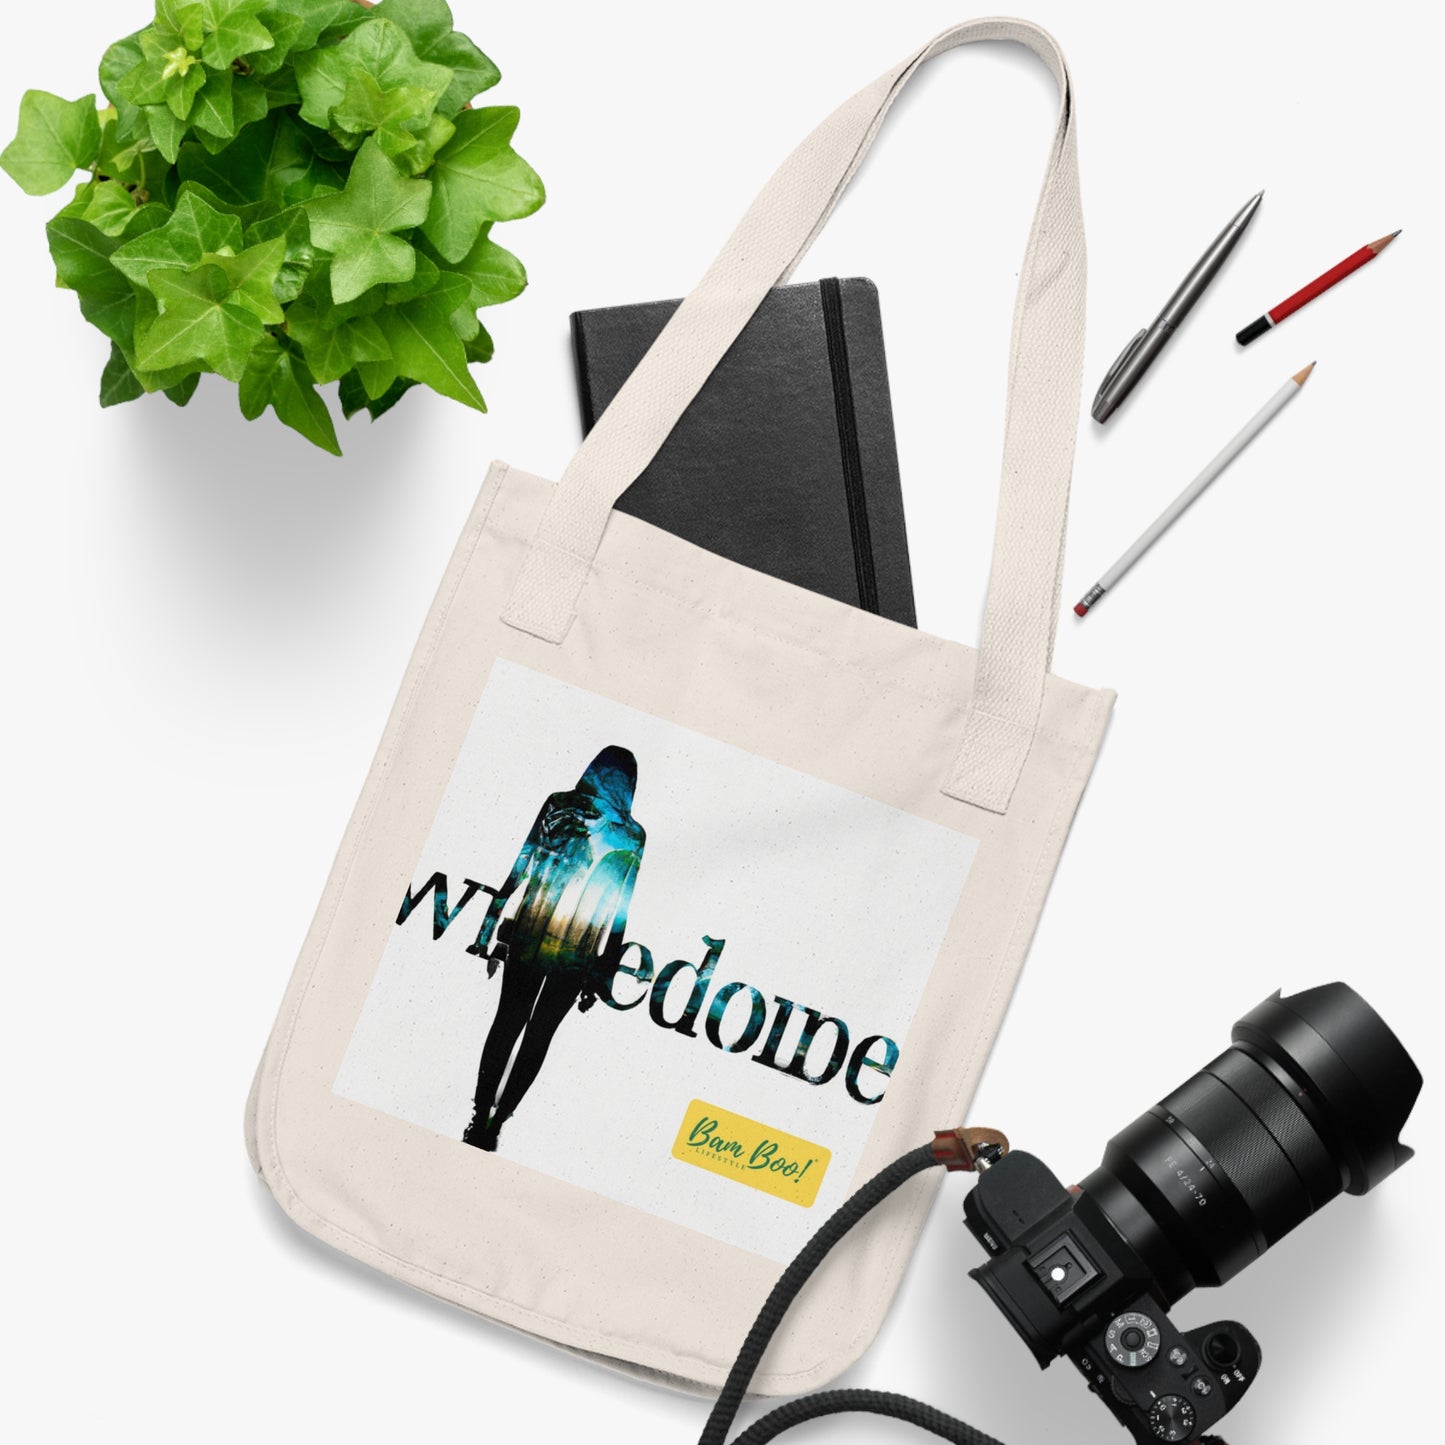 "My Image, My Dream" - Bam Boo! Lifestyle Eco-friendly Tote Bag